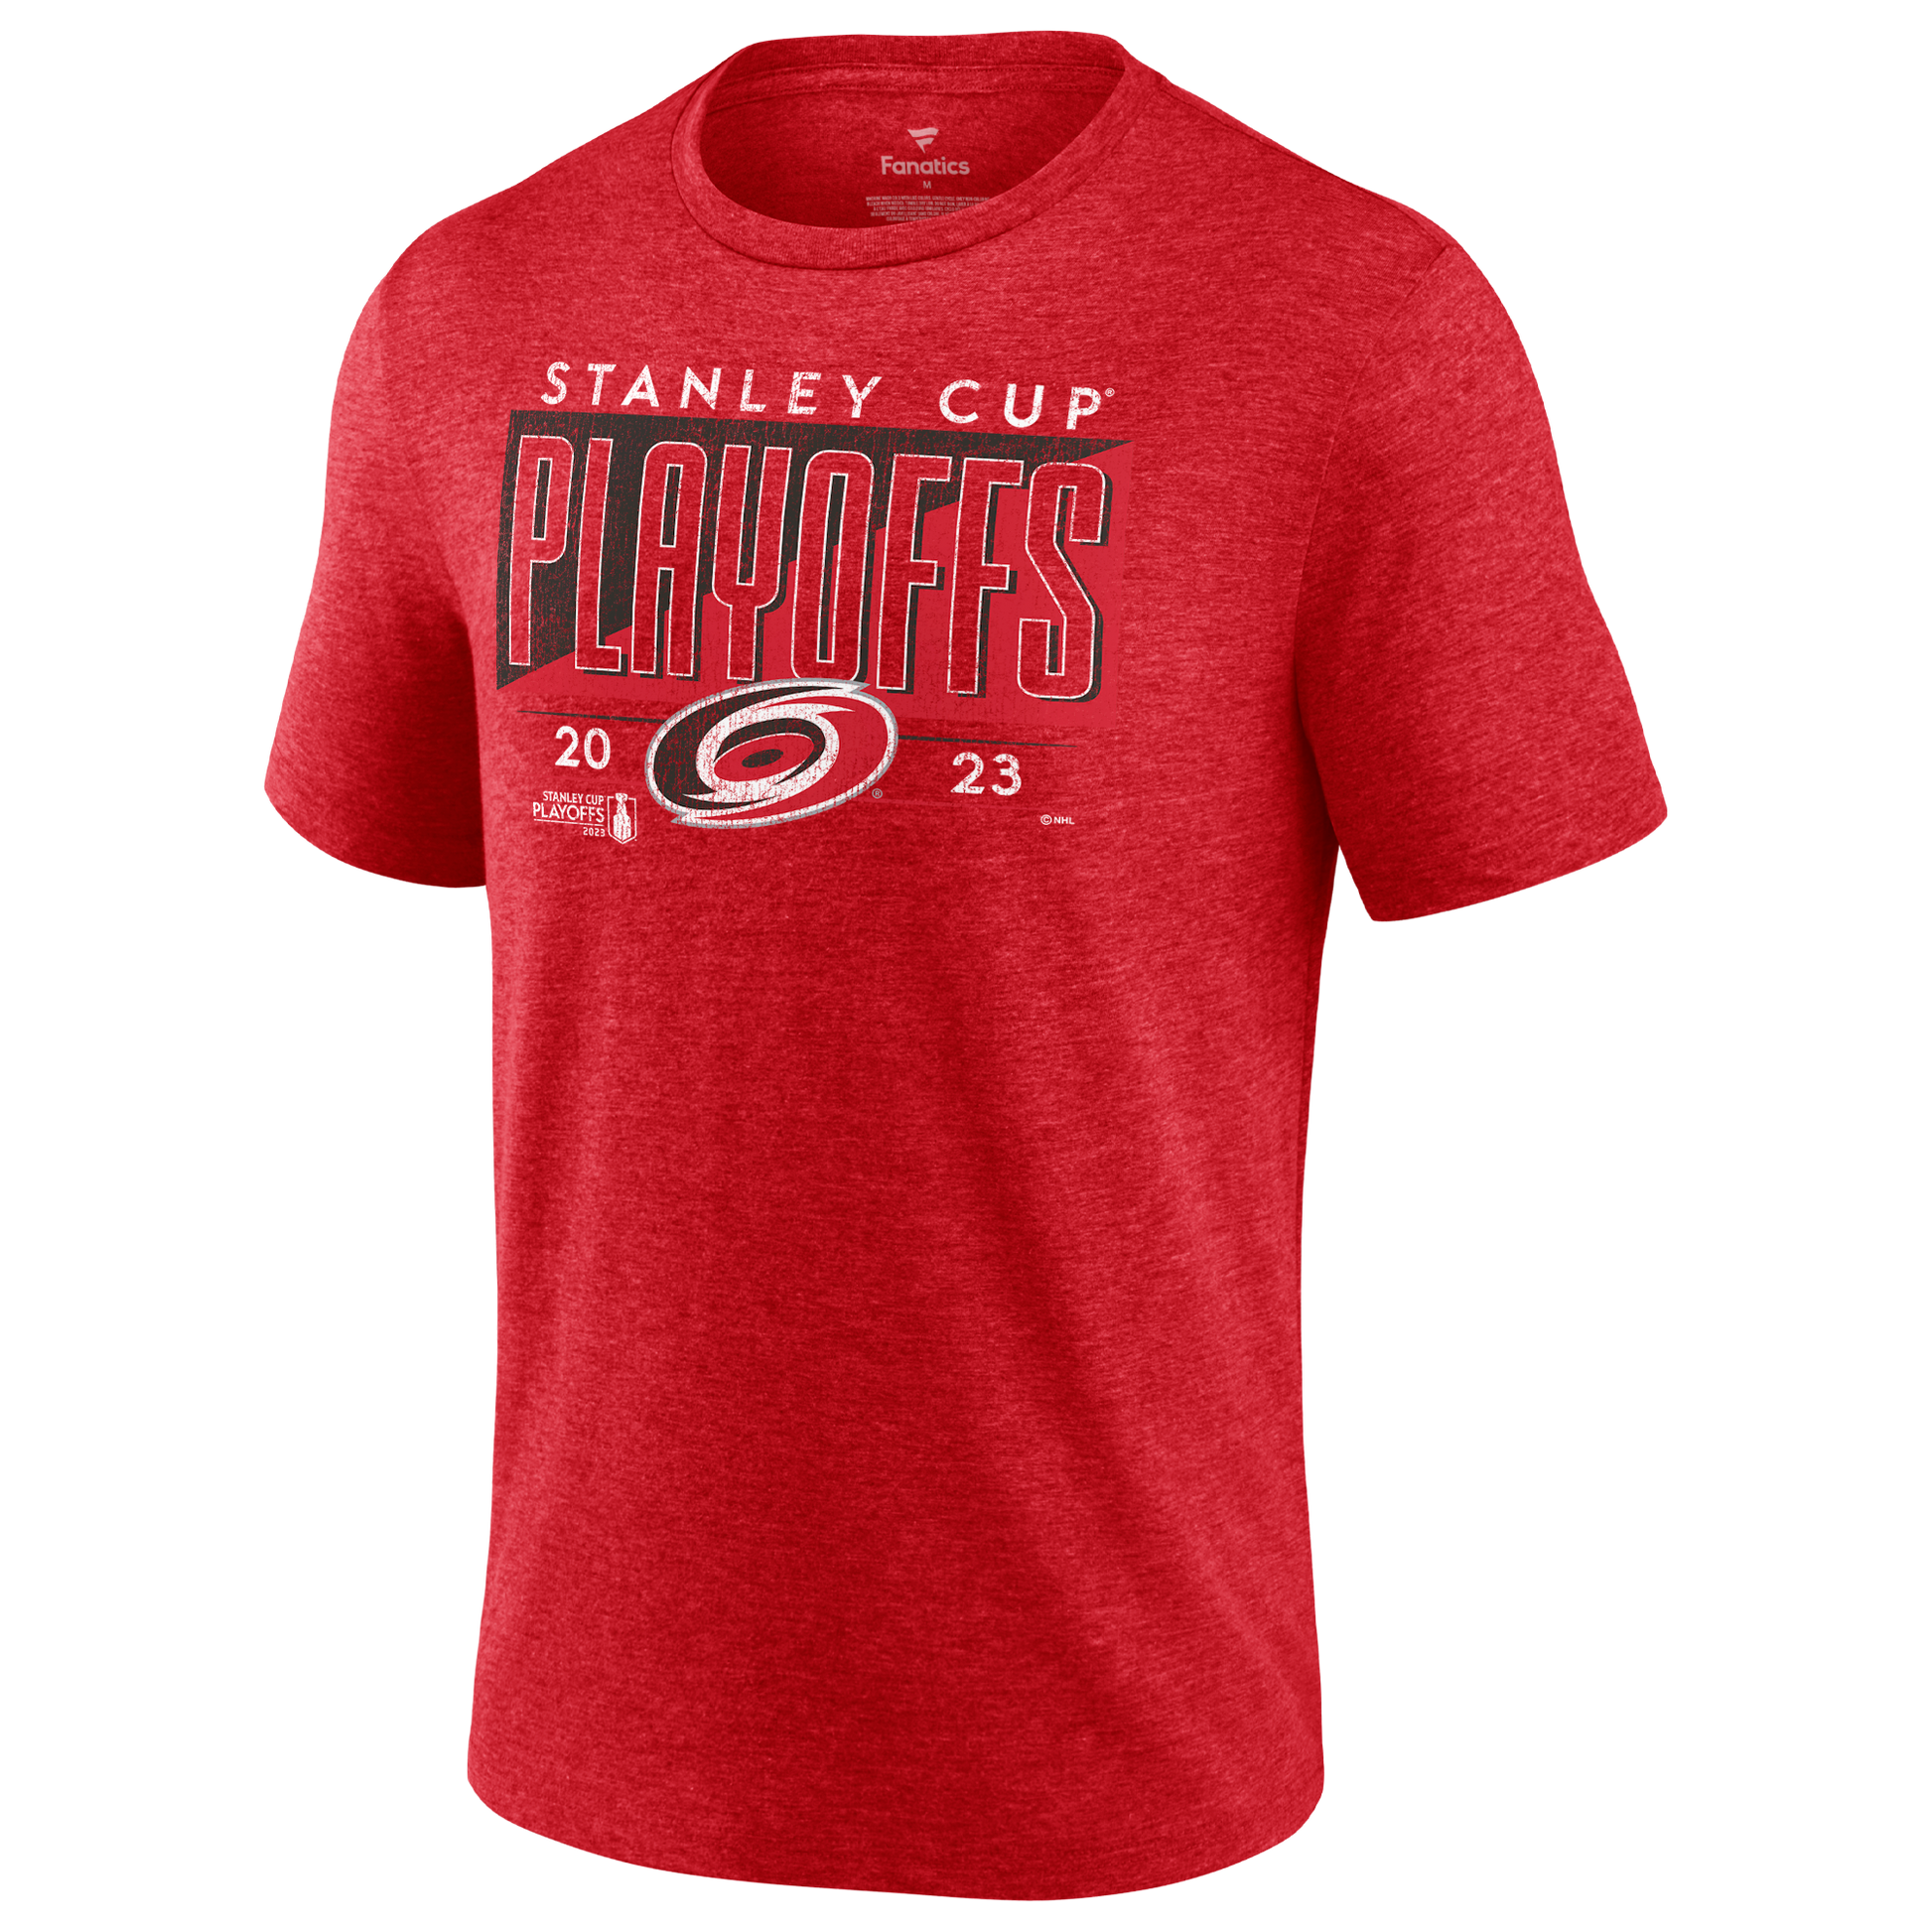 Red tee that reads "Stanley Cup Playoffs 2023" with Hurricanes primary logo